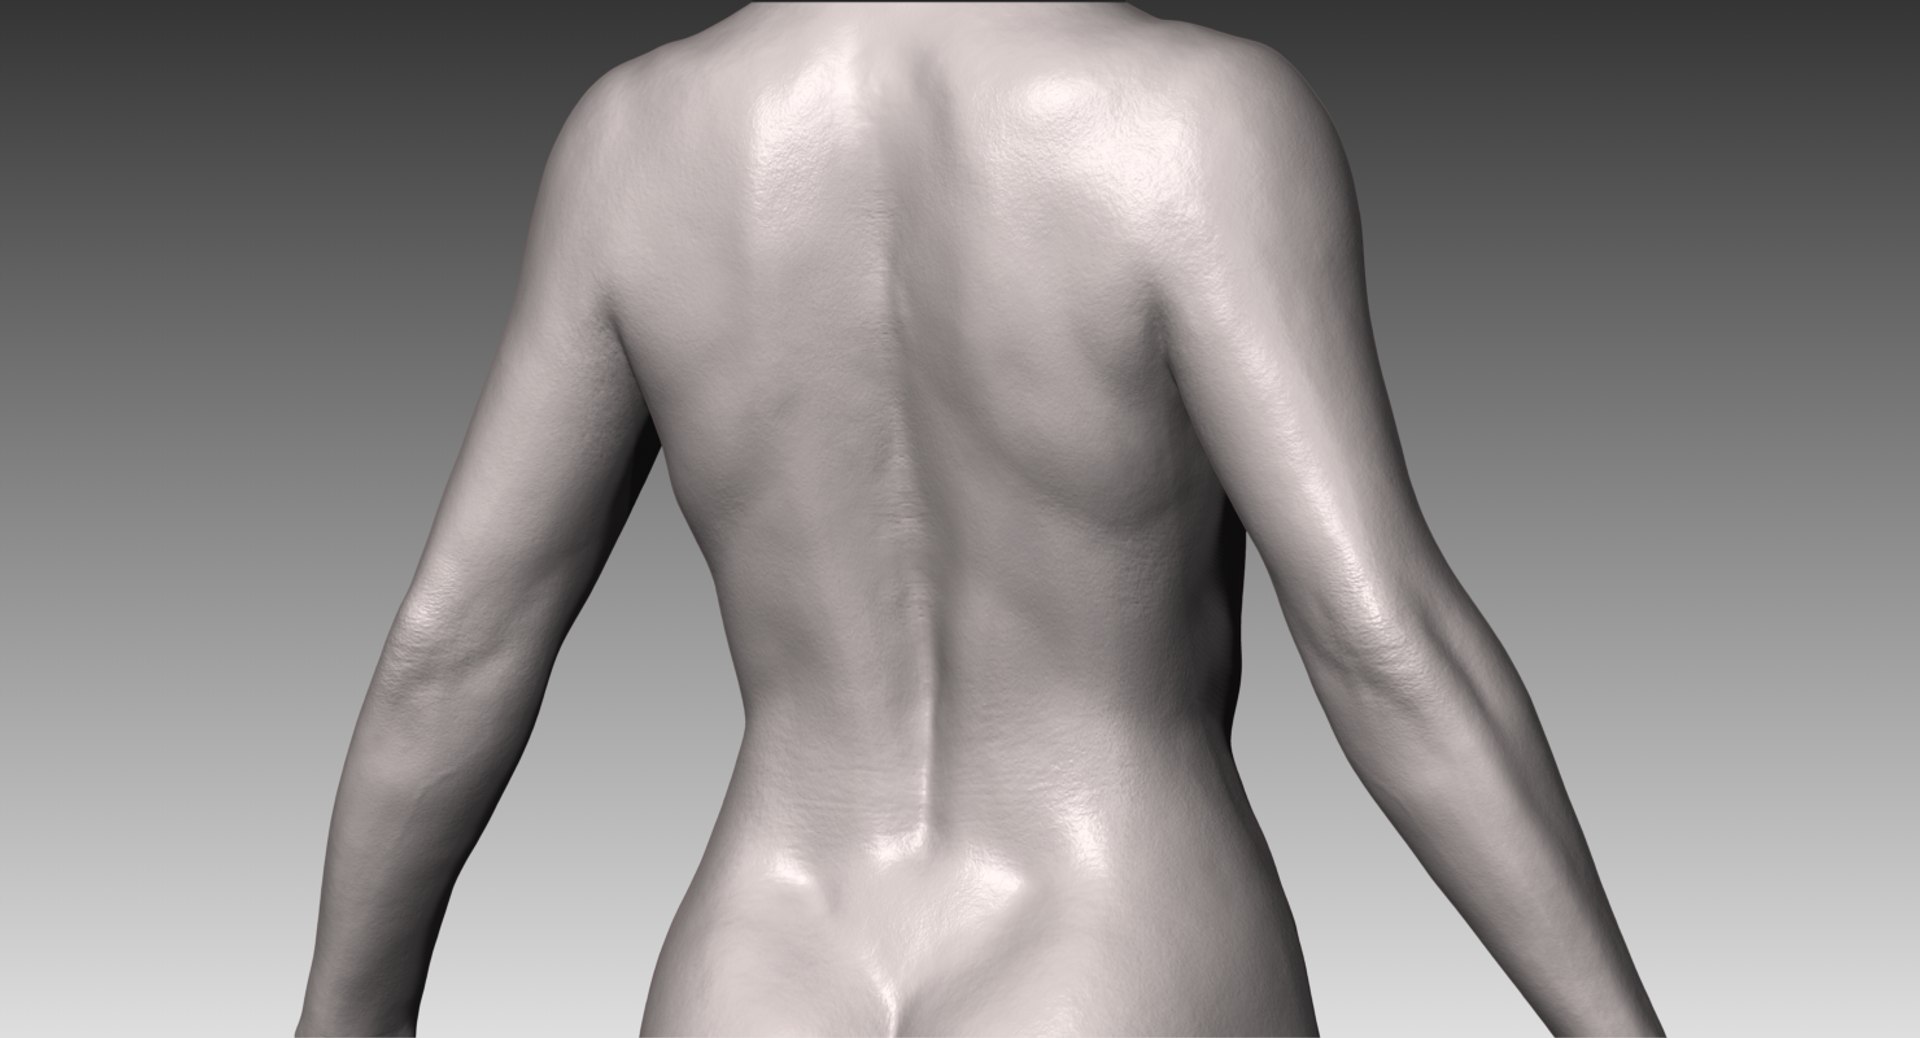 3D render of a muscular female figure with close up of back